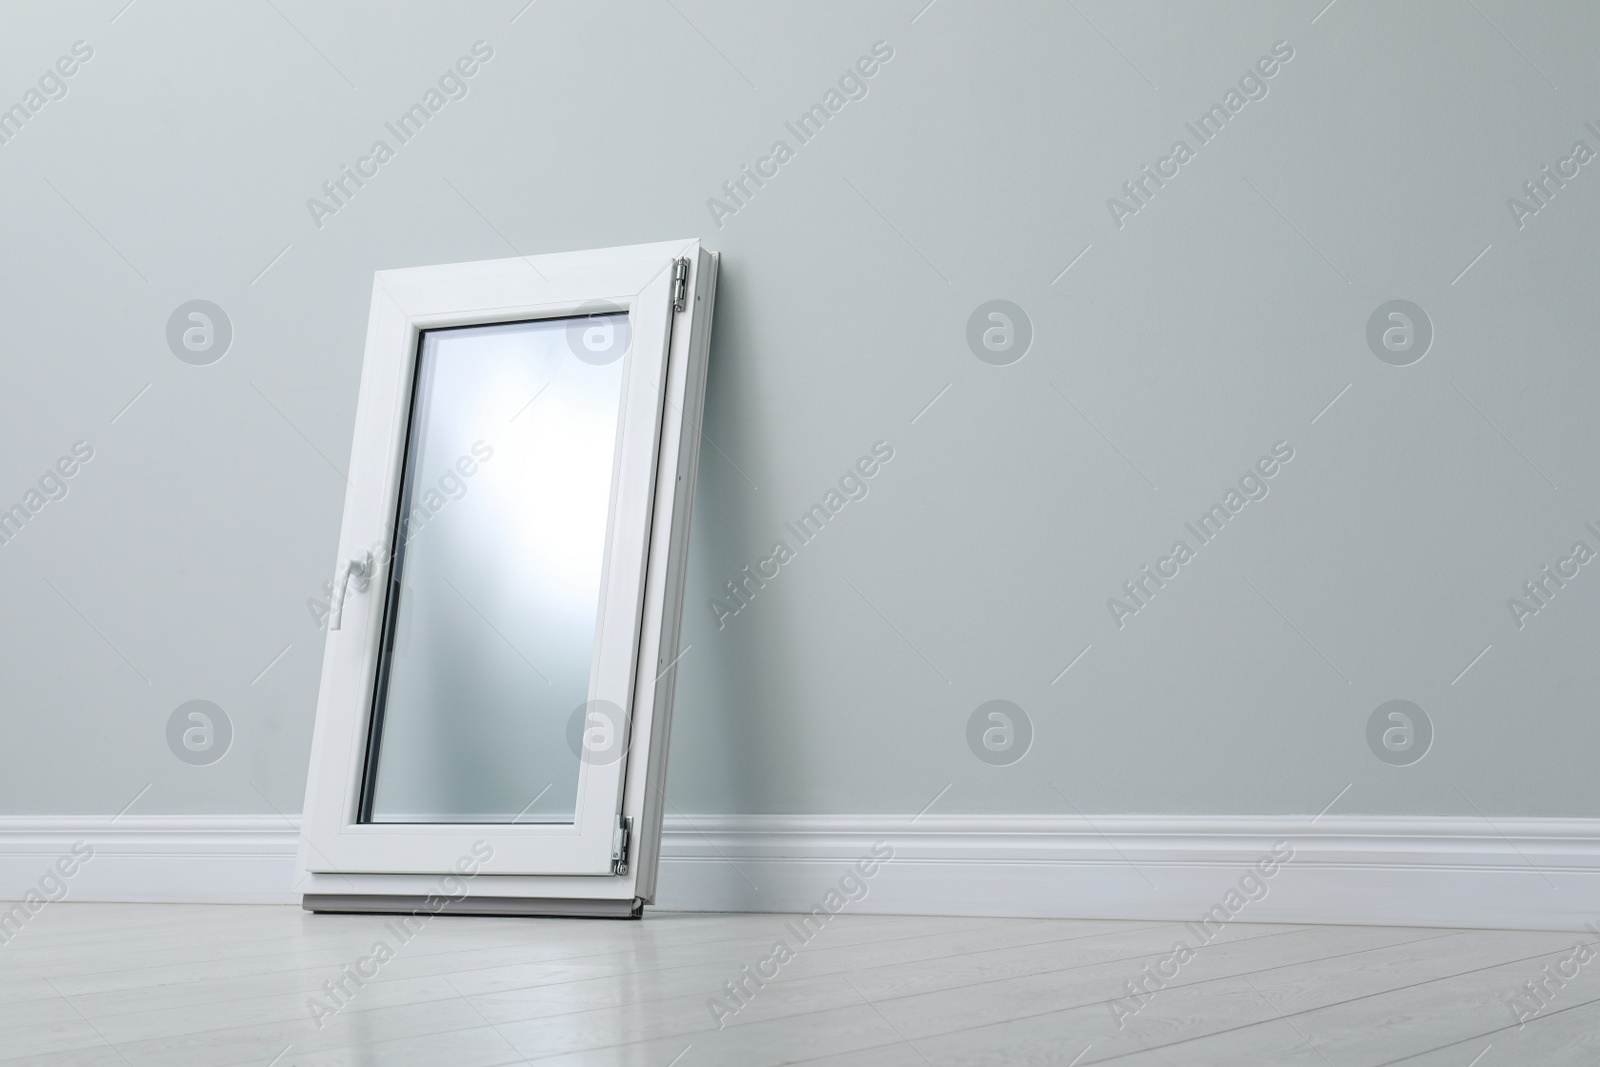 Photo of Modern single casement window near light grey wall indoors, space for text